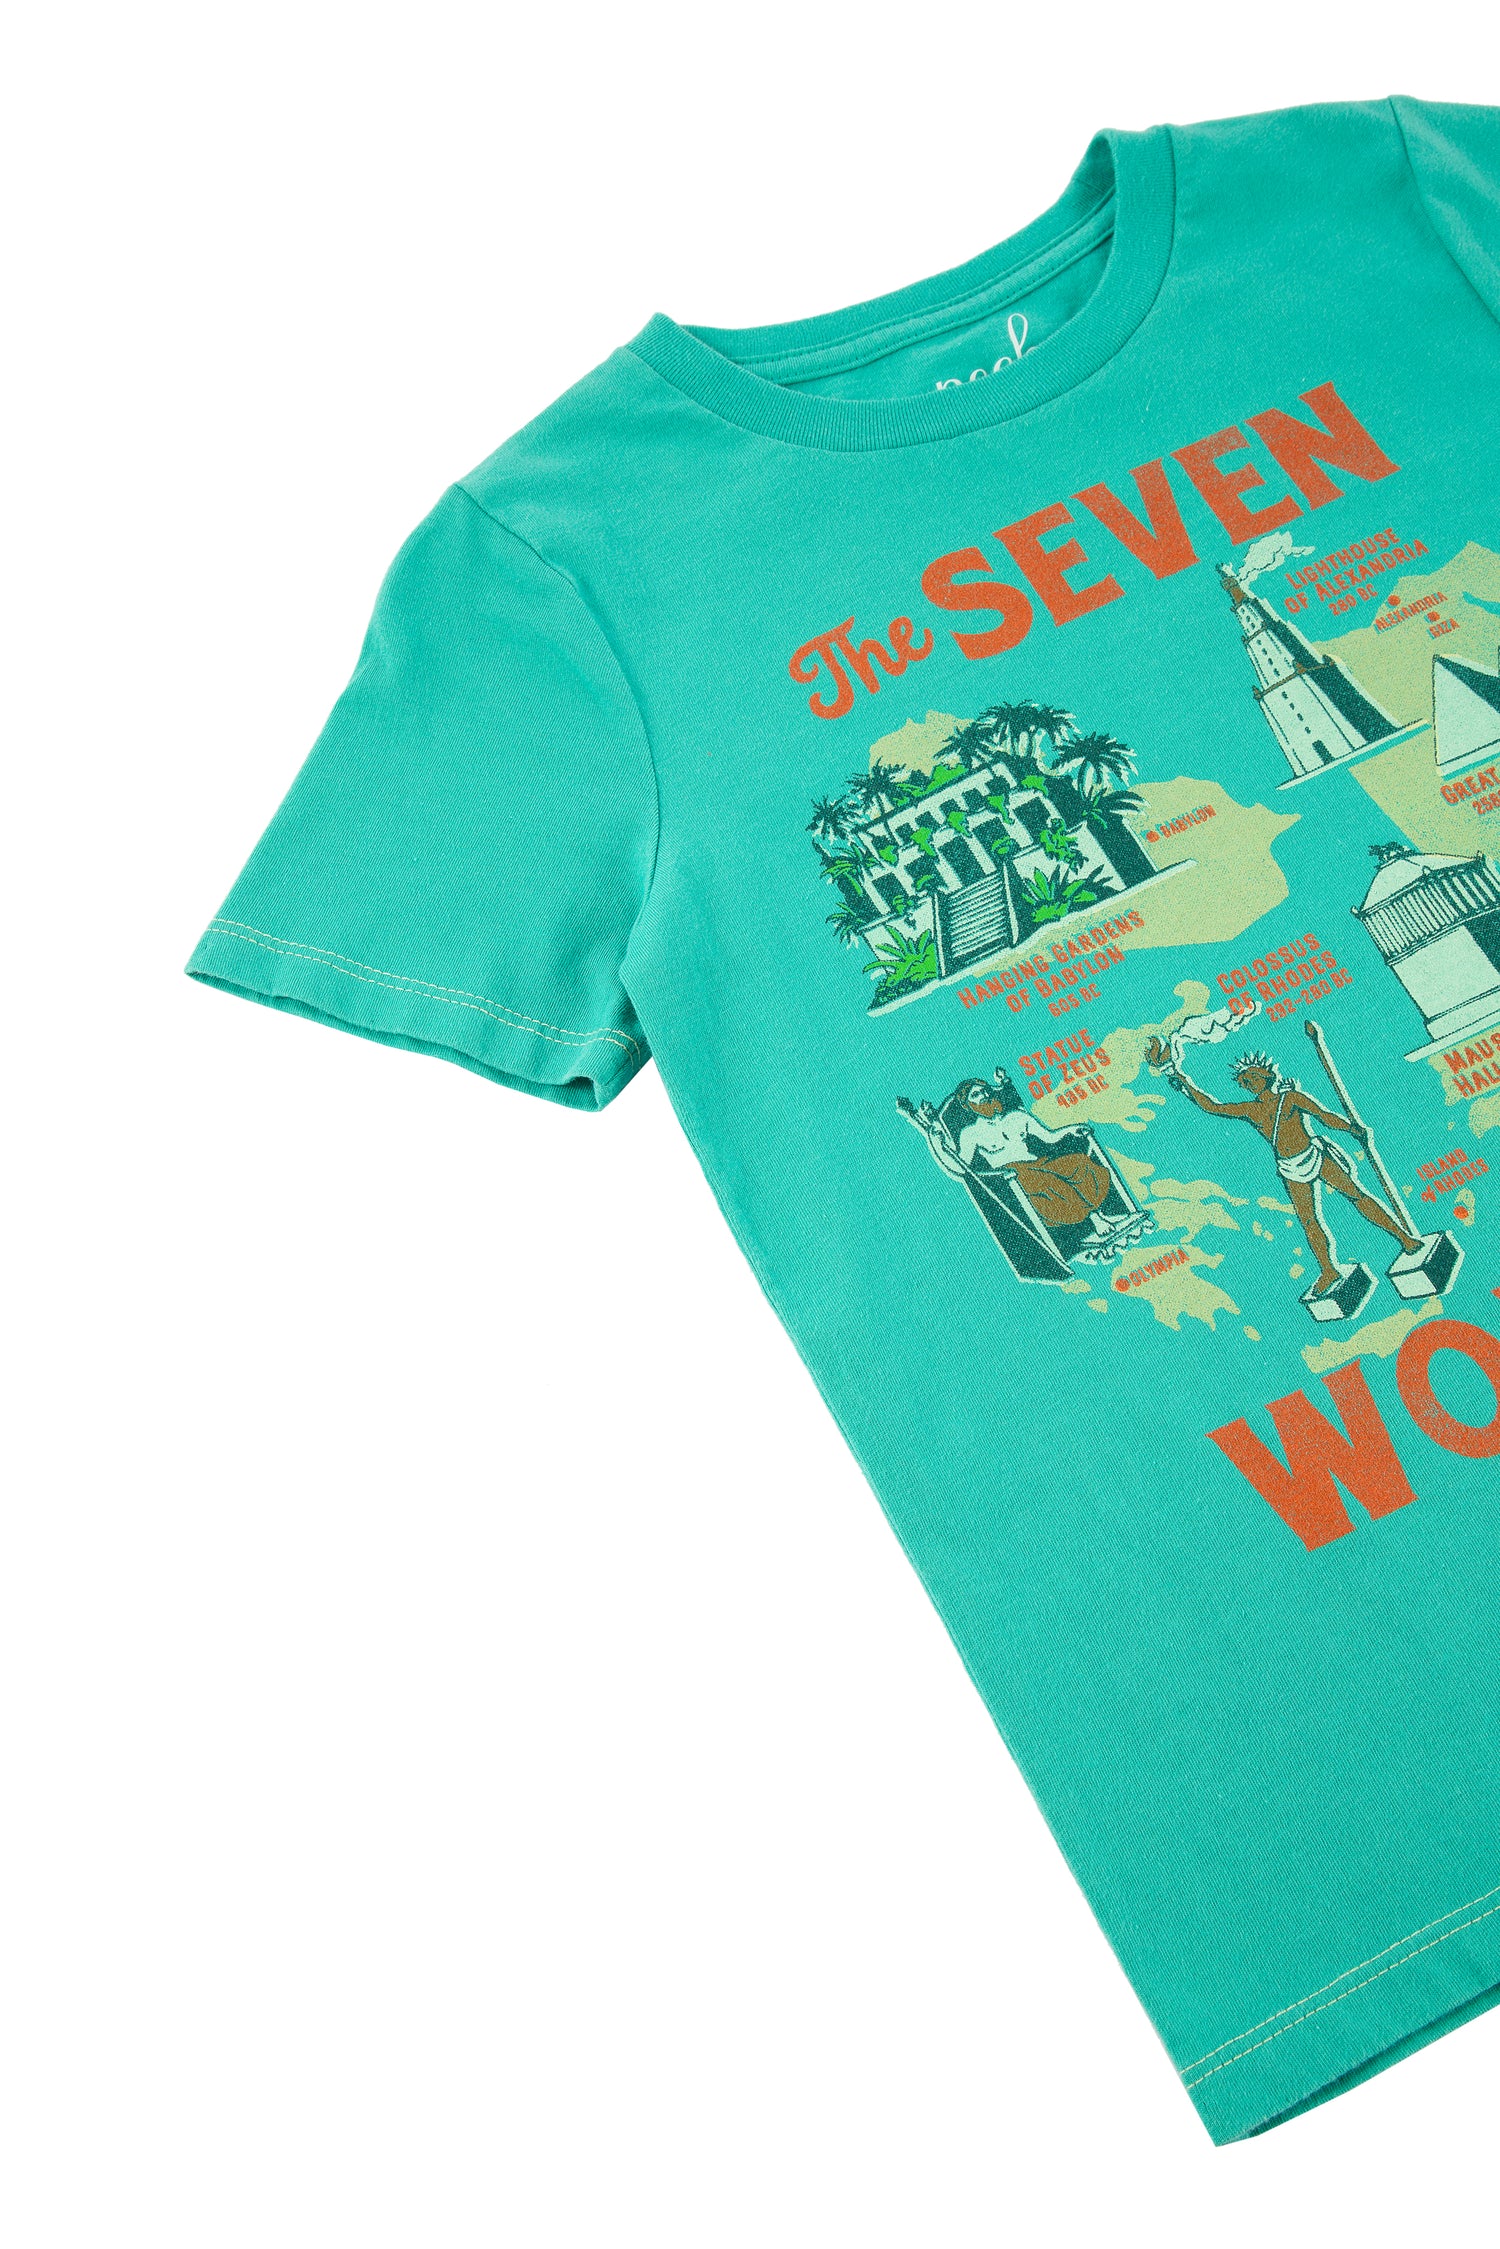 Close up of turquoise t-shirt with orange 'the seven wonders' text